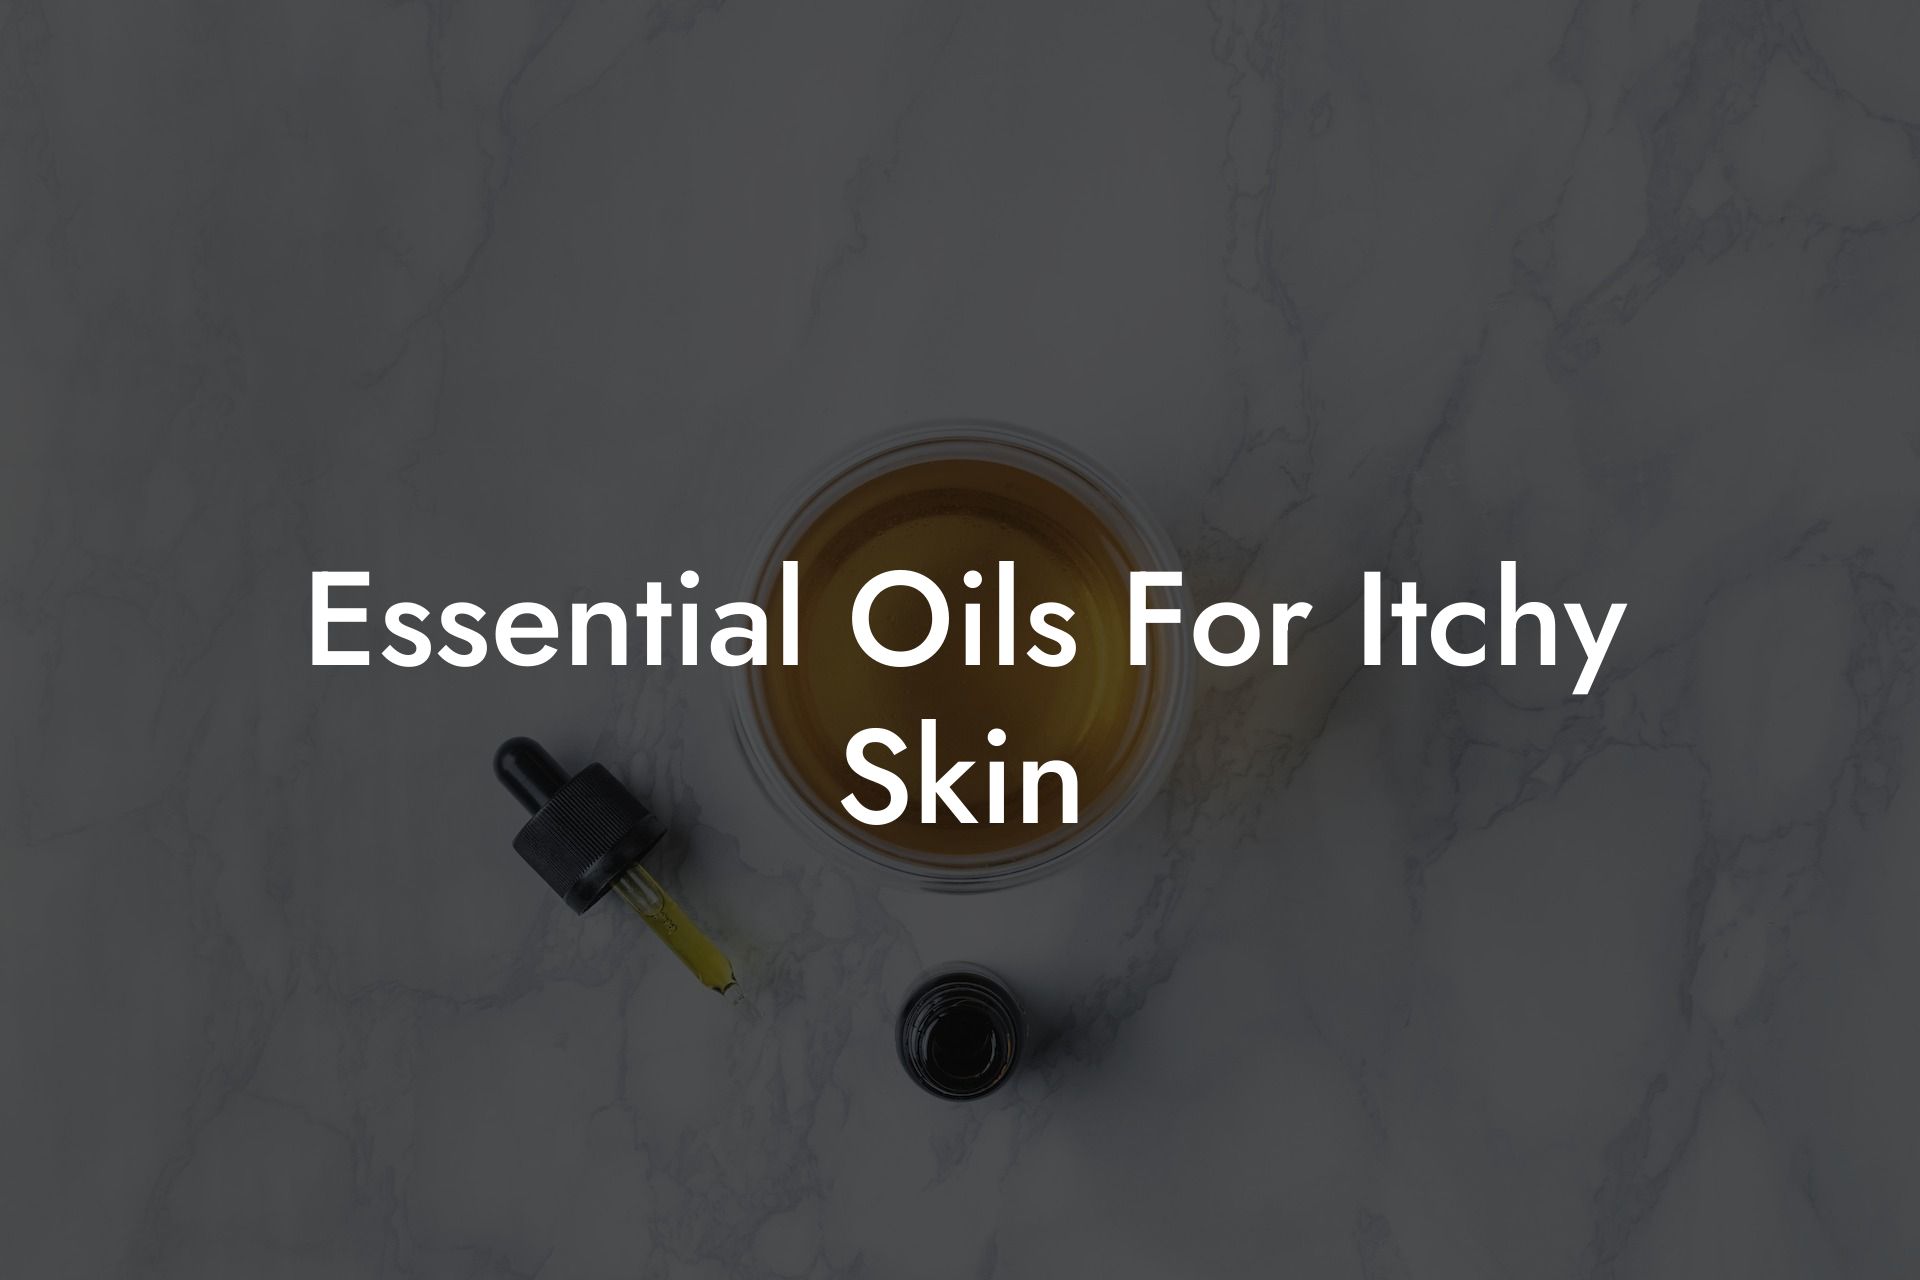 Essential Oils For Itchy Skin